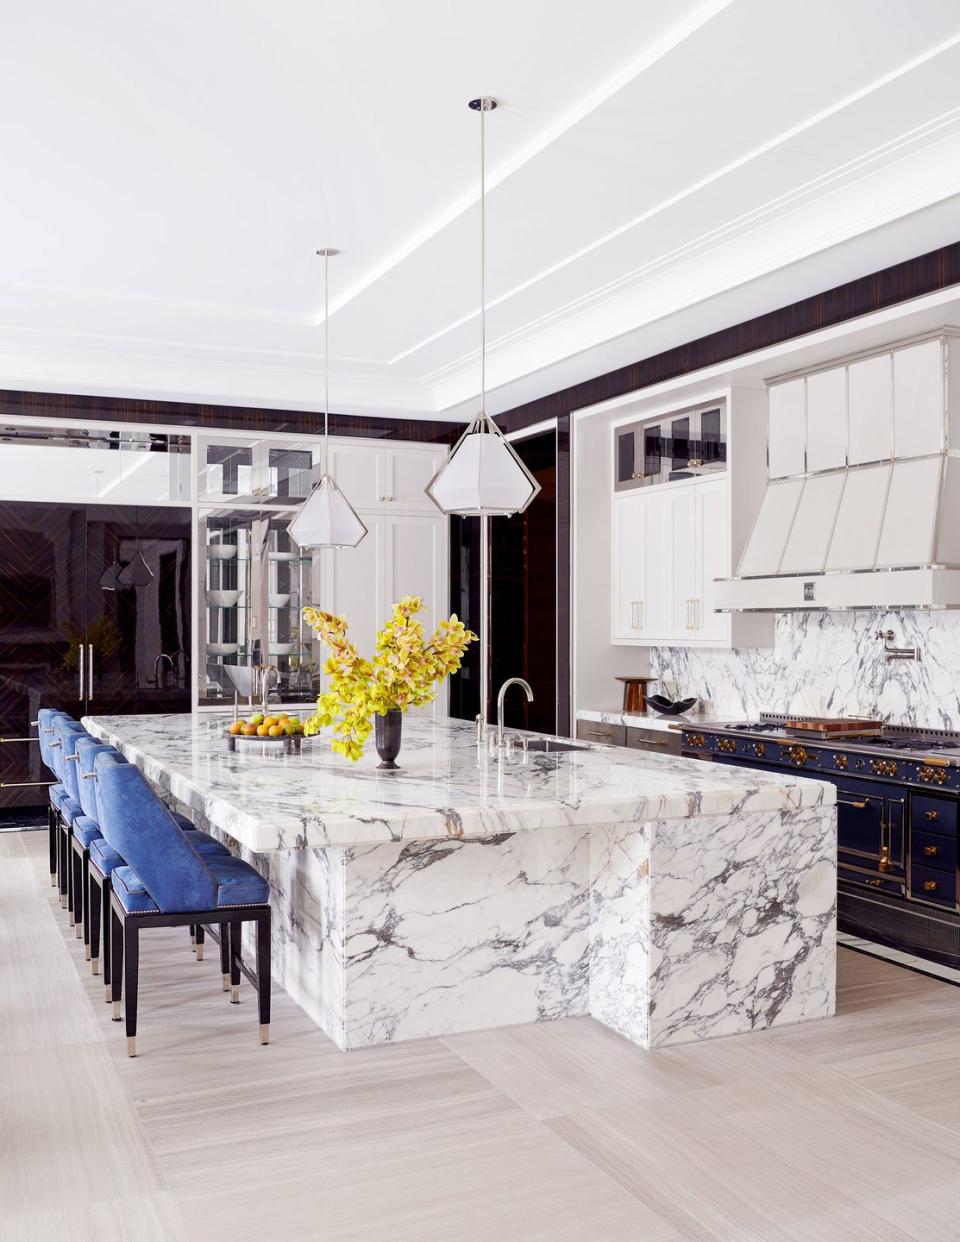 Photo credit: Architectural Digest